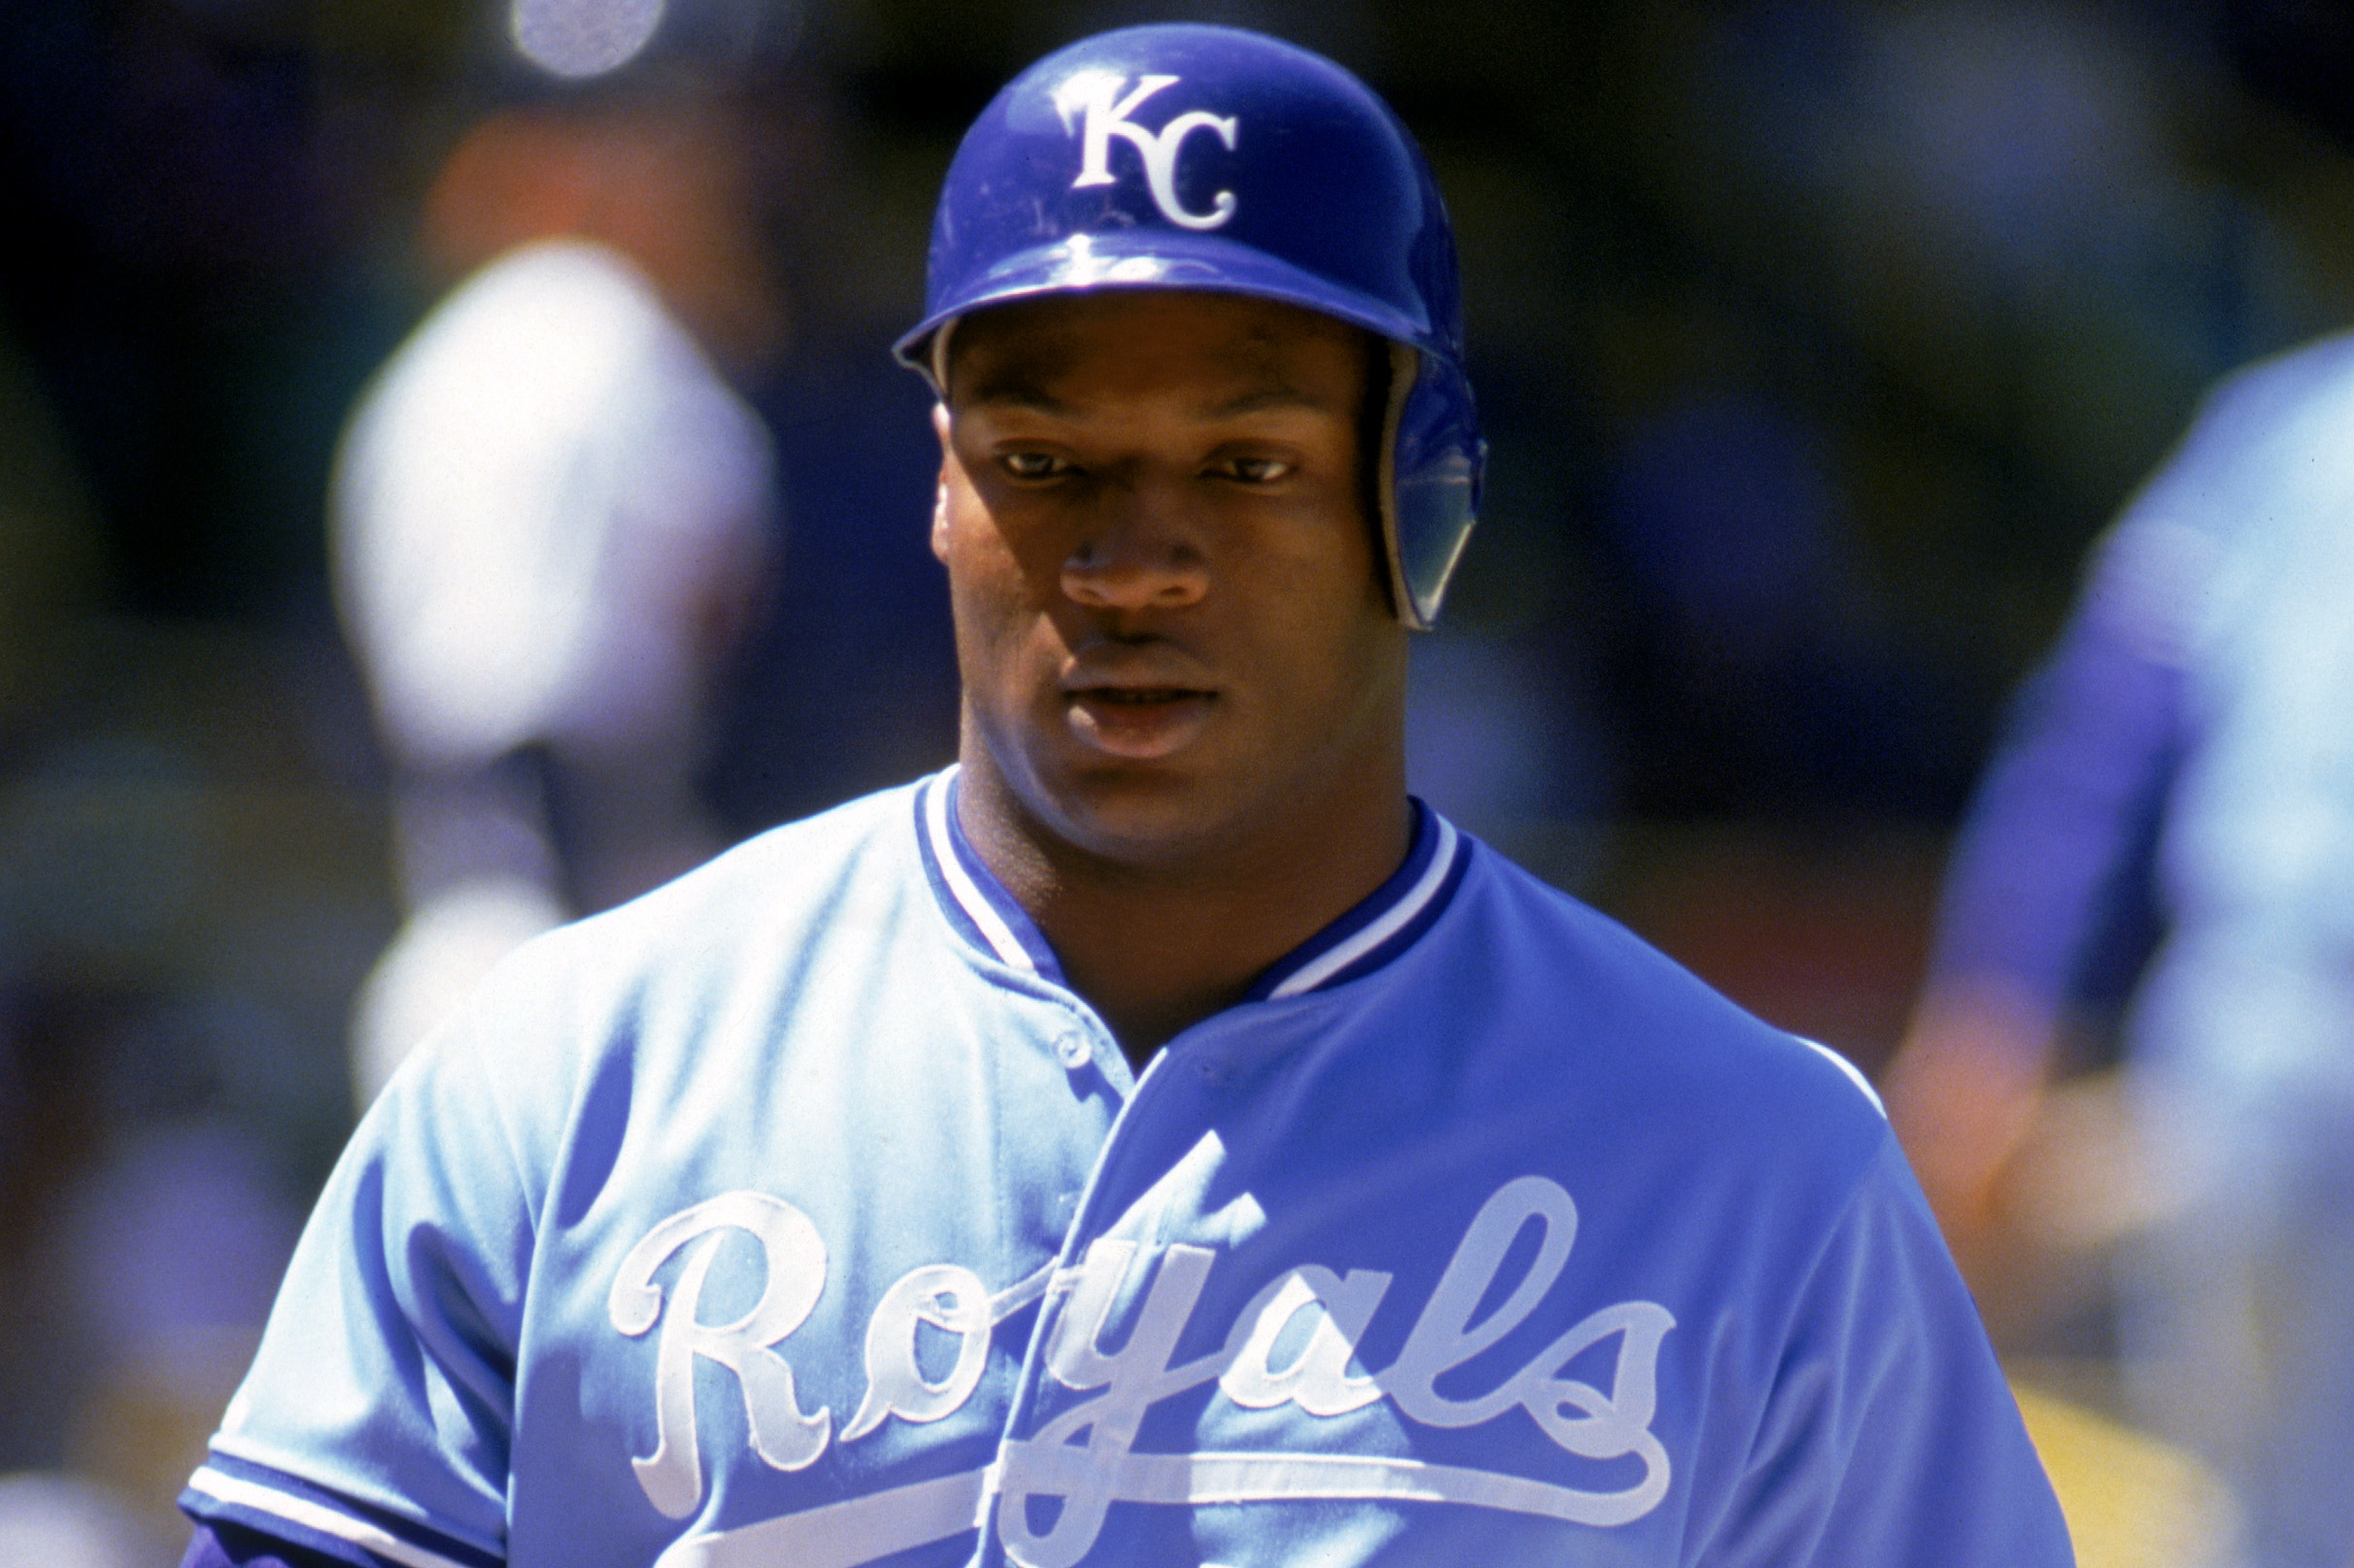 Bo Jackson's Most Shocking Sports Feat Didn't Come in Baseball or Football